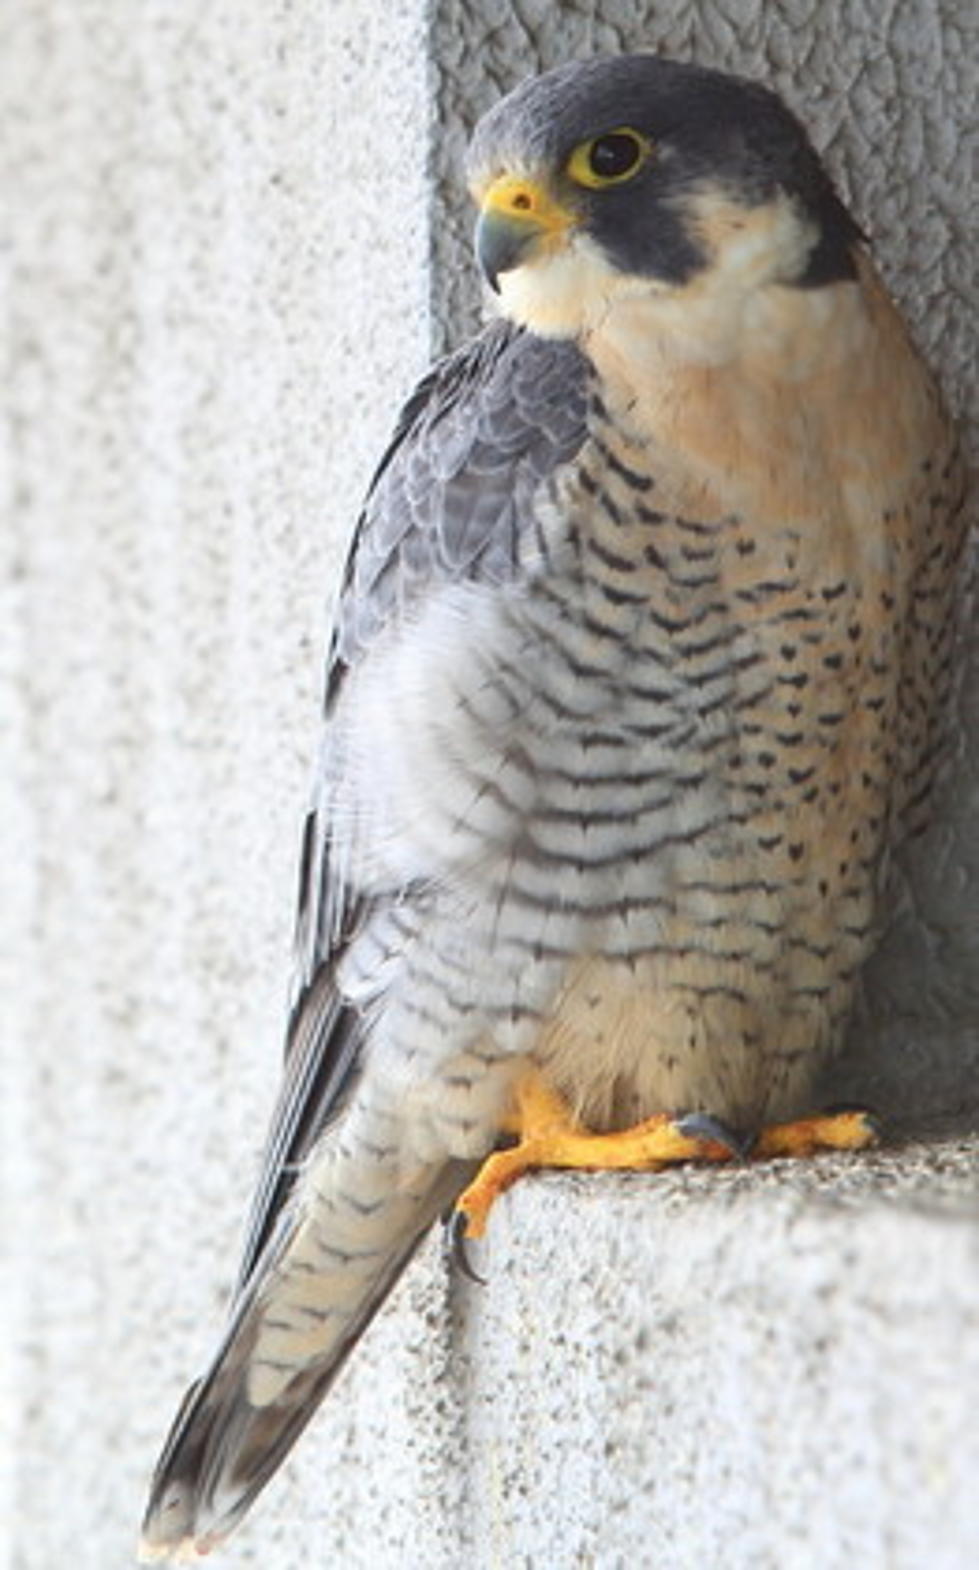 Woman Sentenced to Community Service after Falcon’s Death